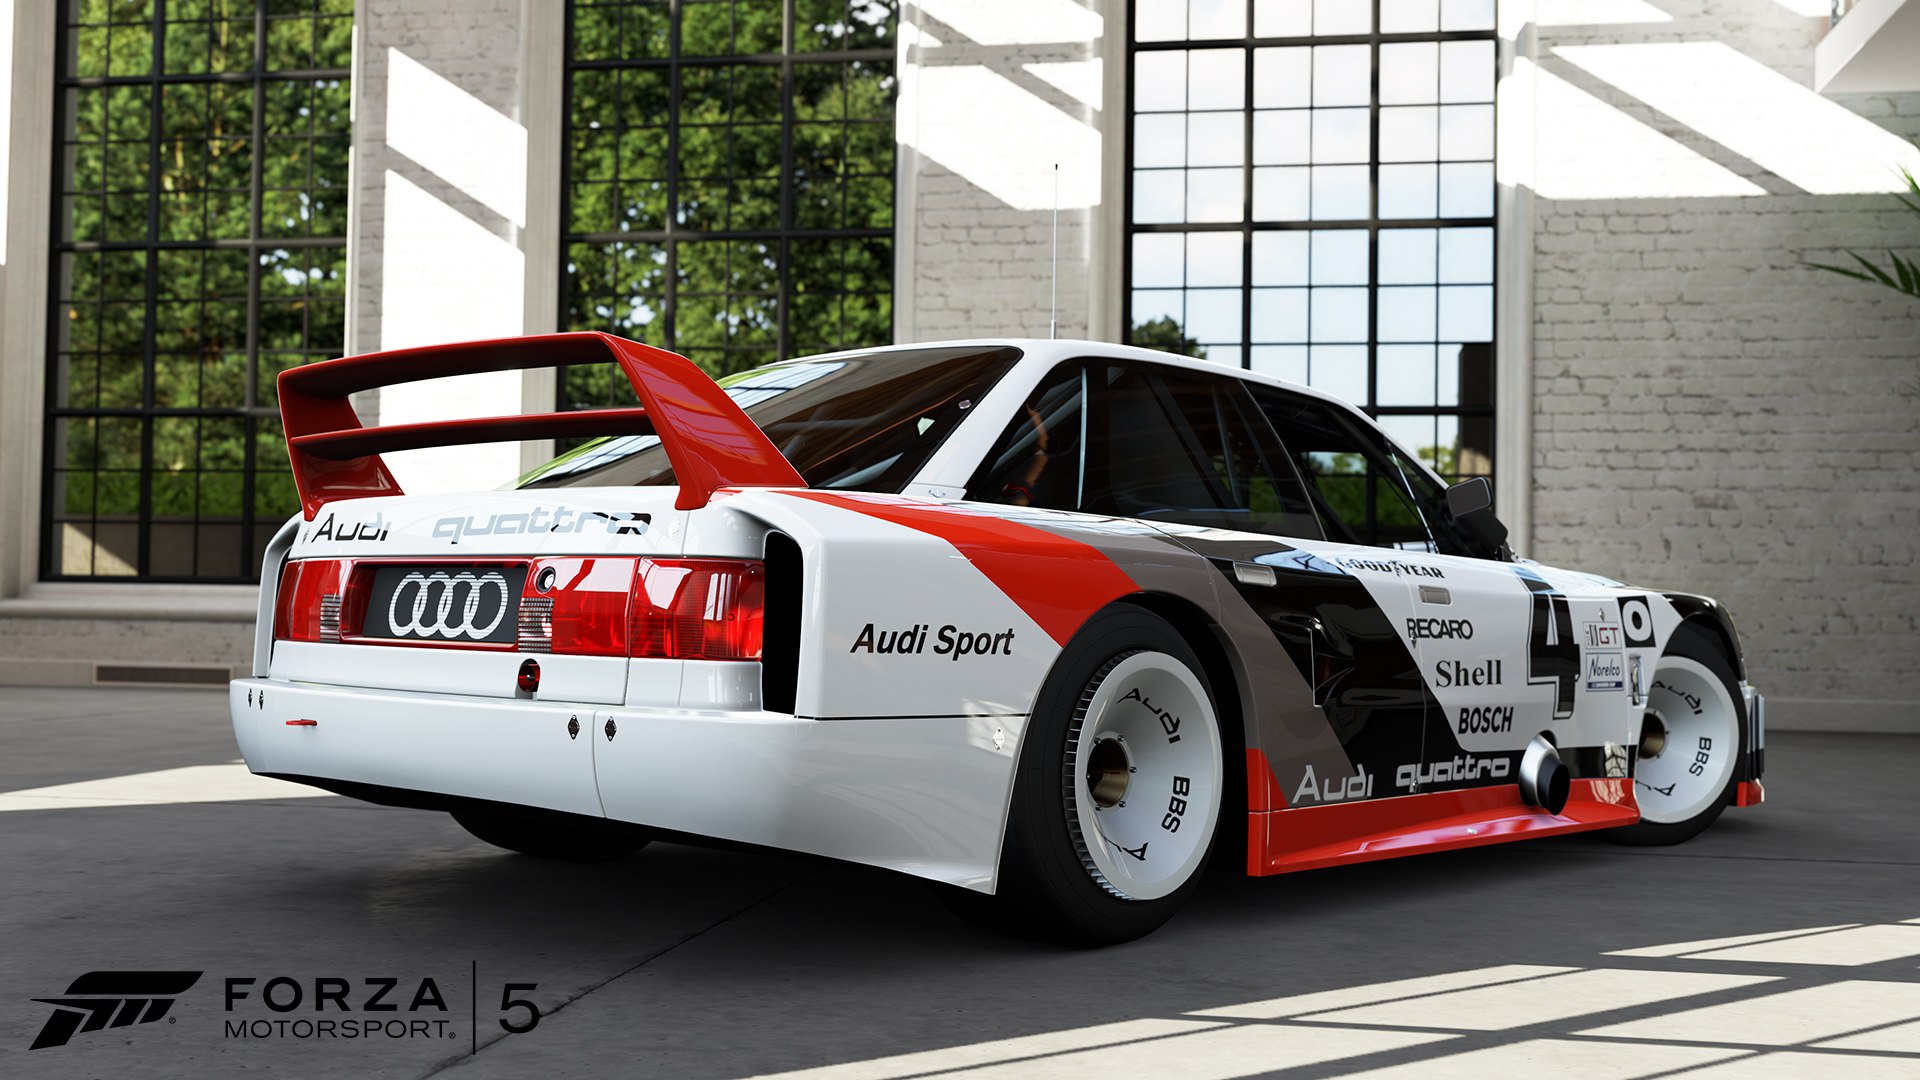 Xbox One - FORZA 6a56fb6f-e95d-4a37-aee0-44862d9bf1c6.jpg?n=Audi#4_01_WM_Forza5_EXP-NurbBoosterPack